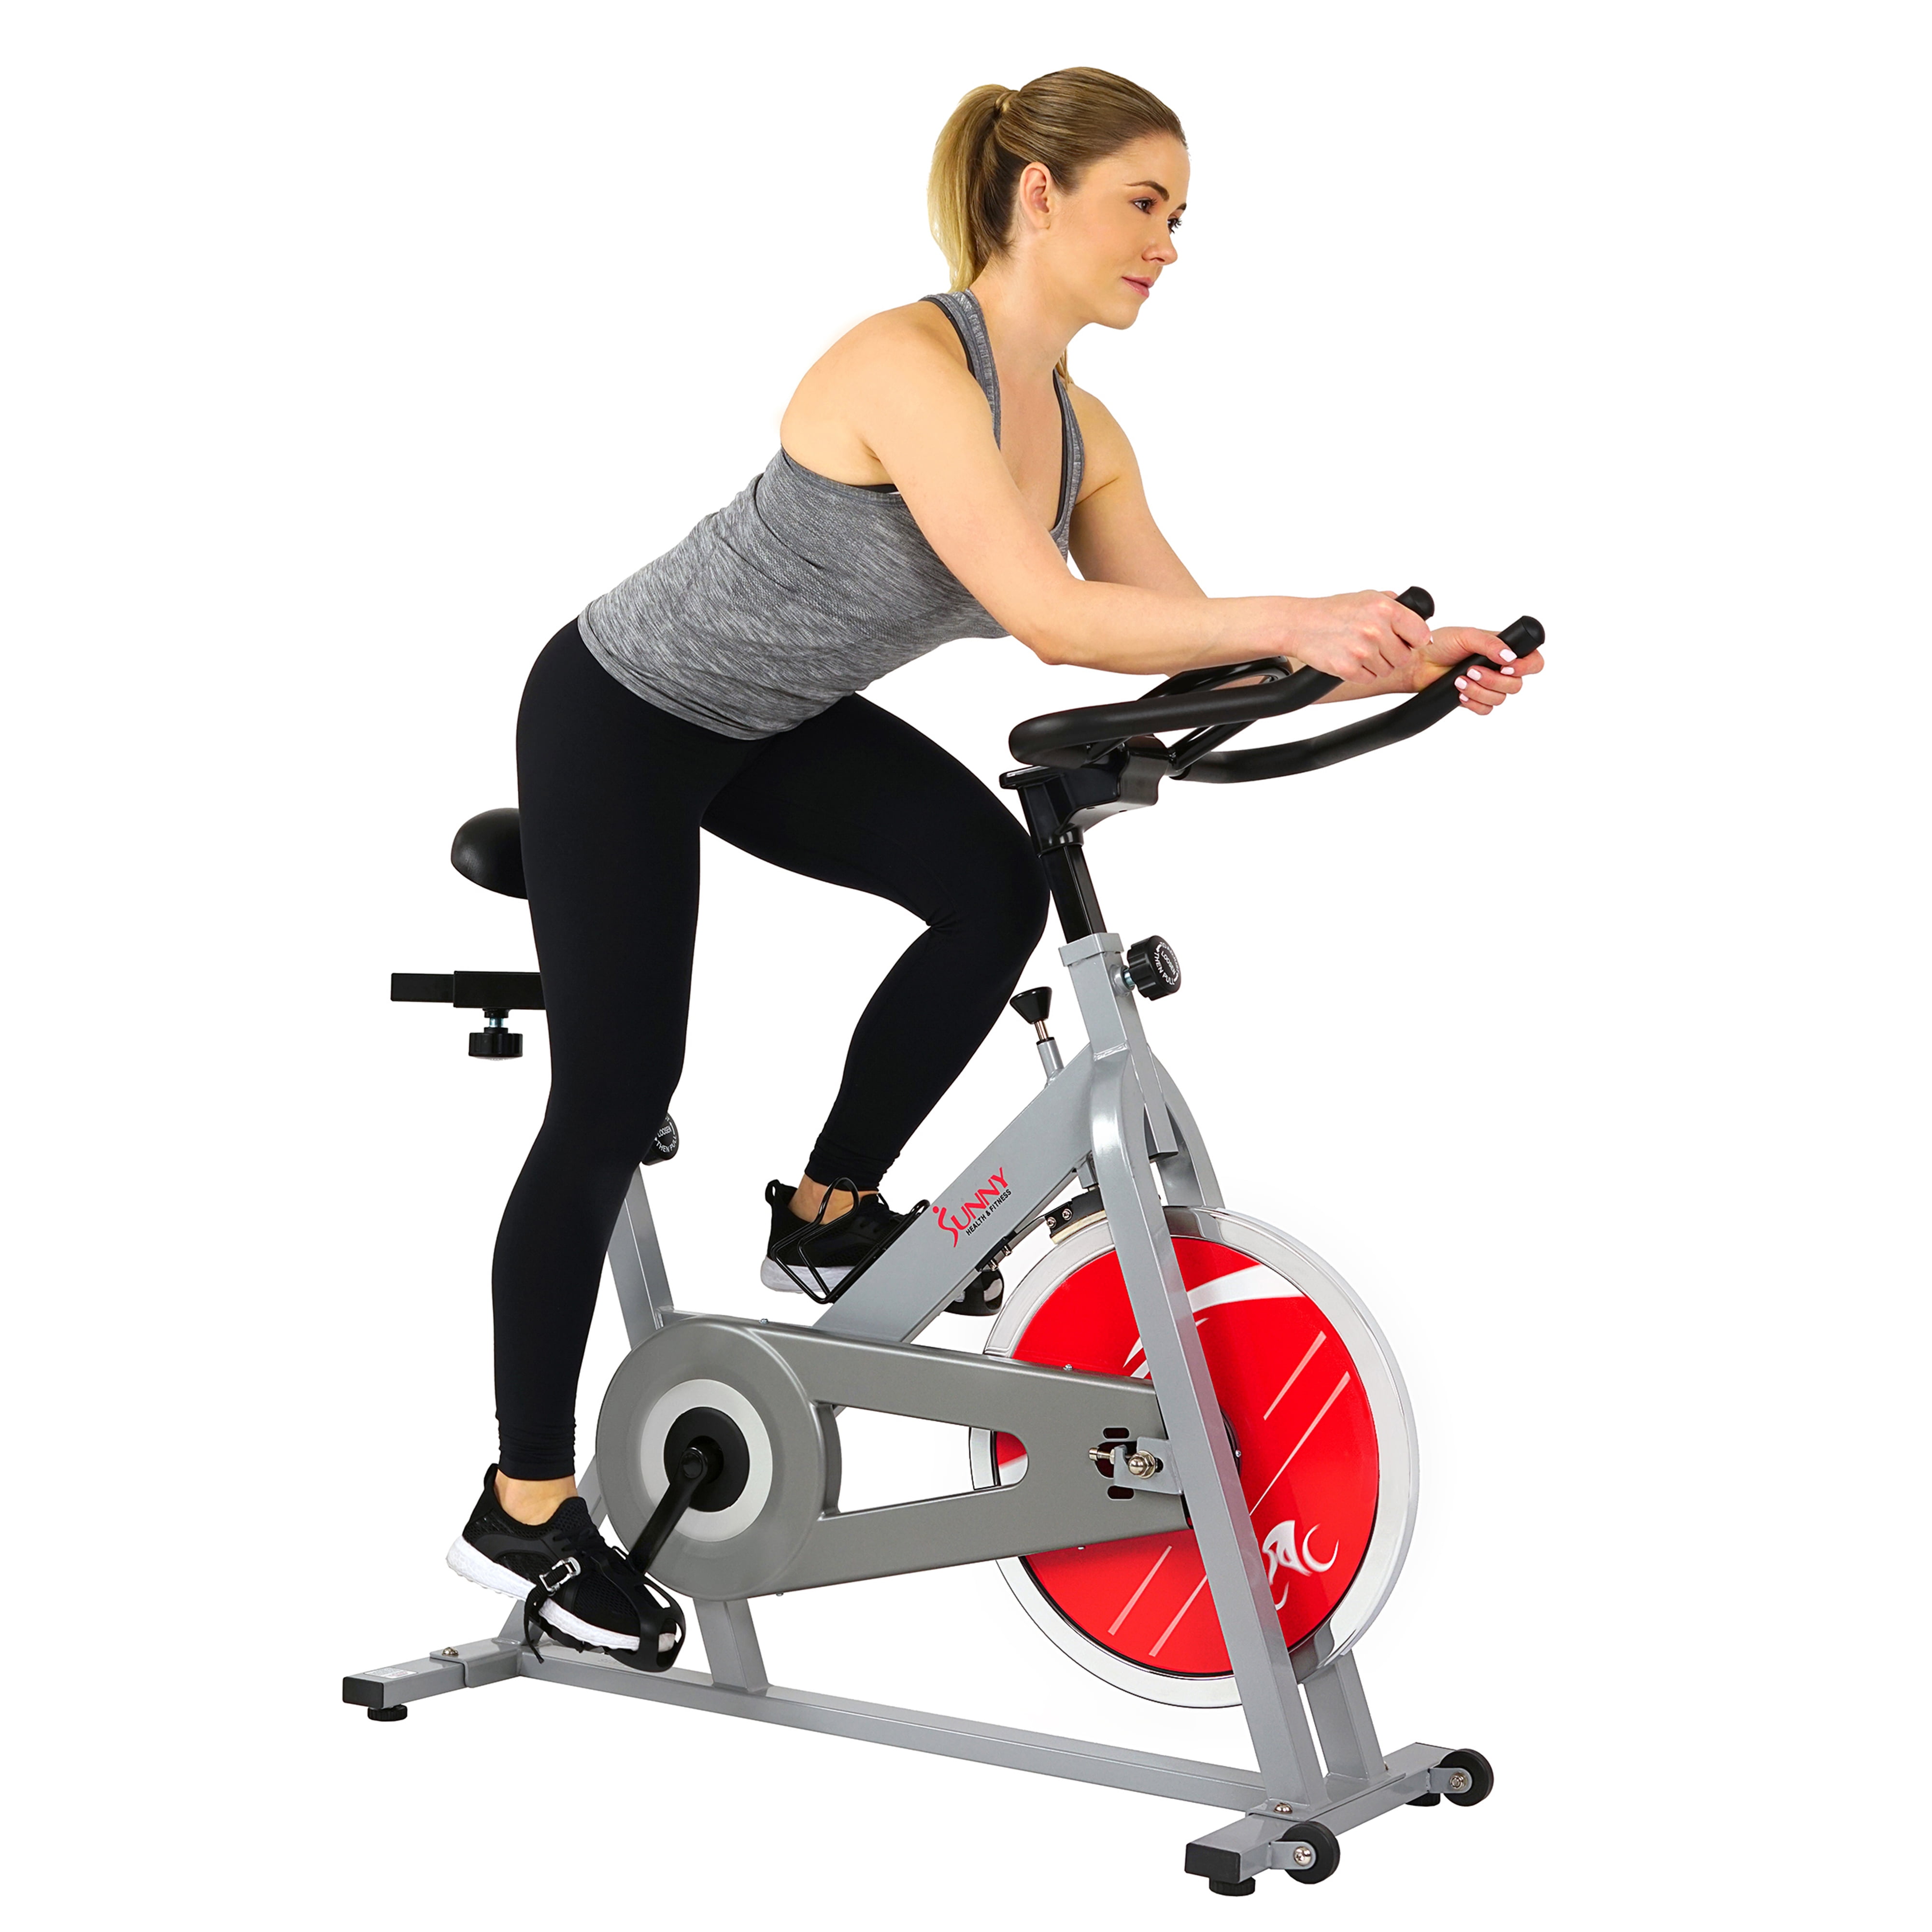 Sunny Health & Fitness Pro Indoor Cycling Bike Trainer indoor Gym Exercise Bike 